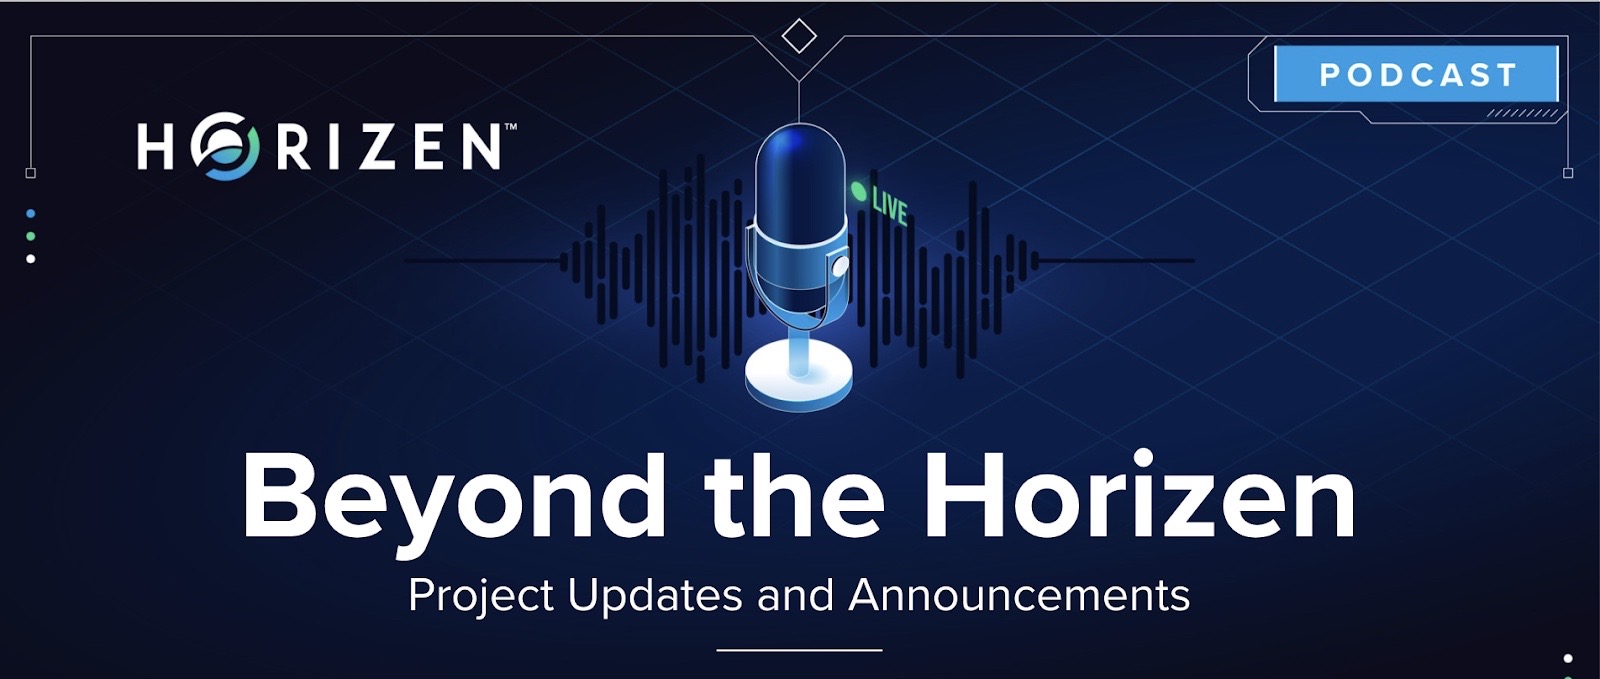 Beyond the Horizen Podcast